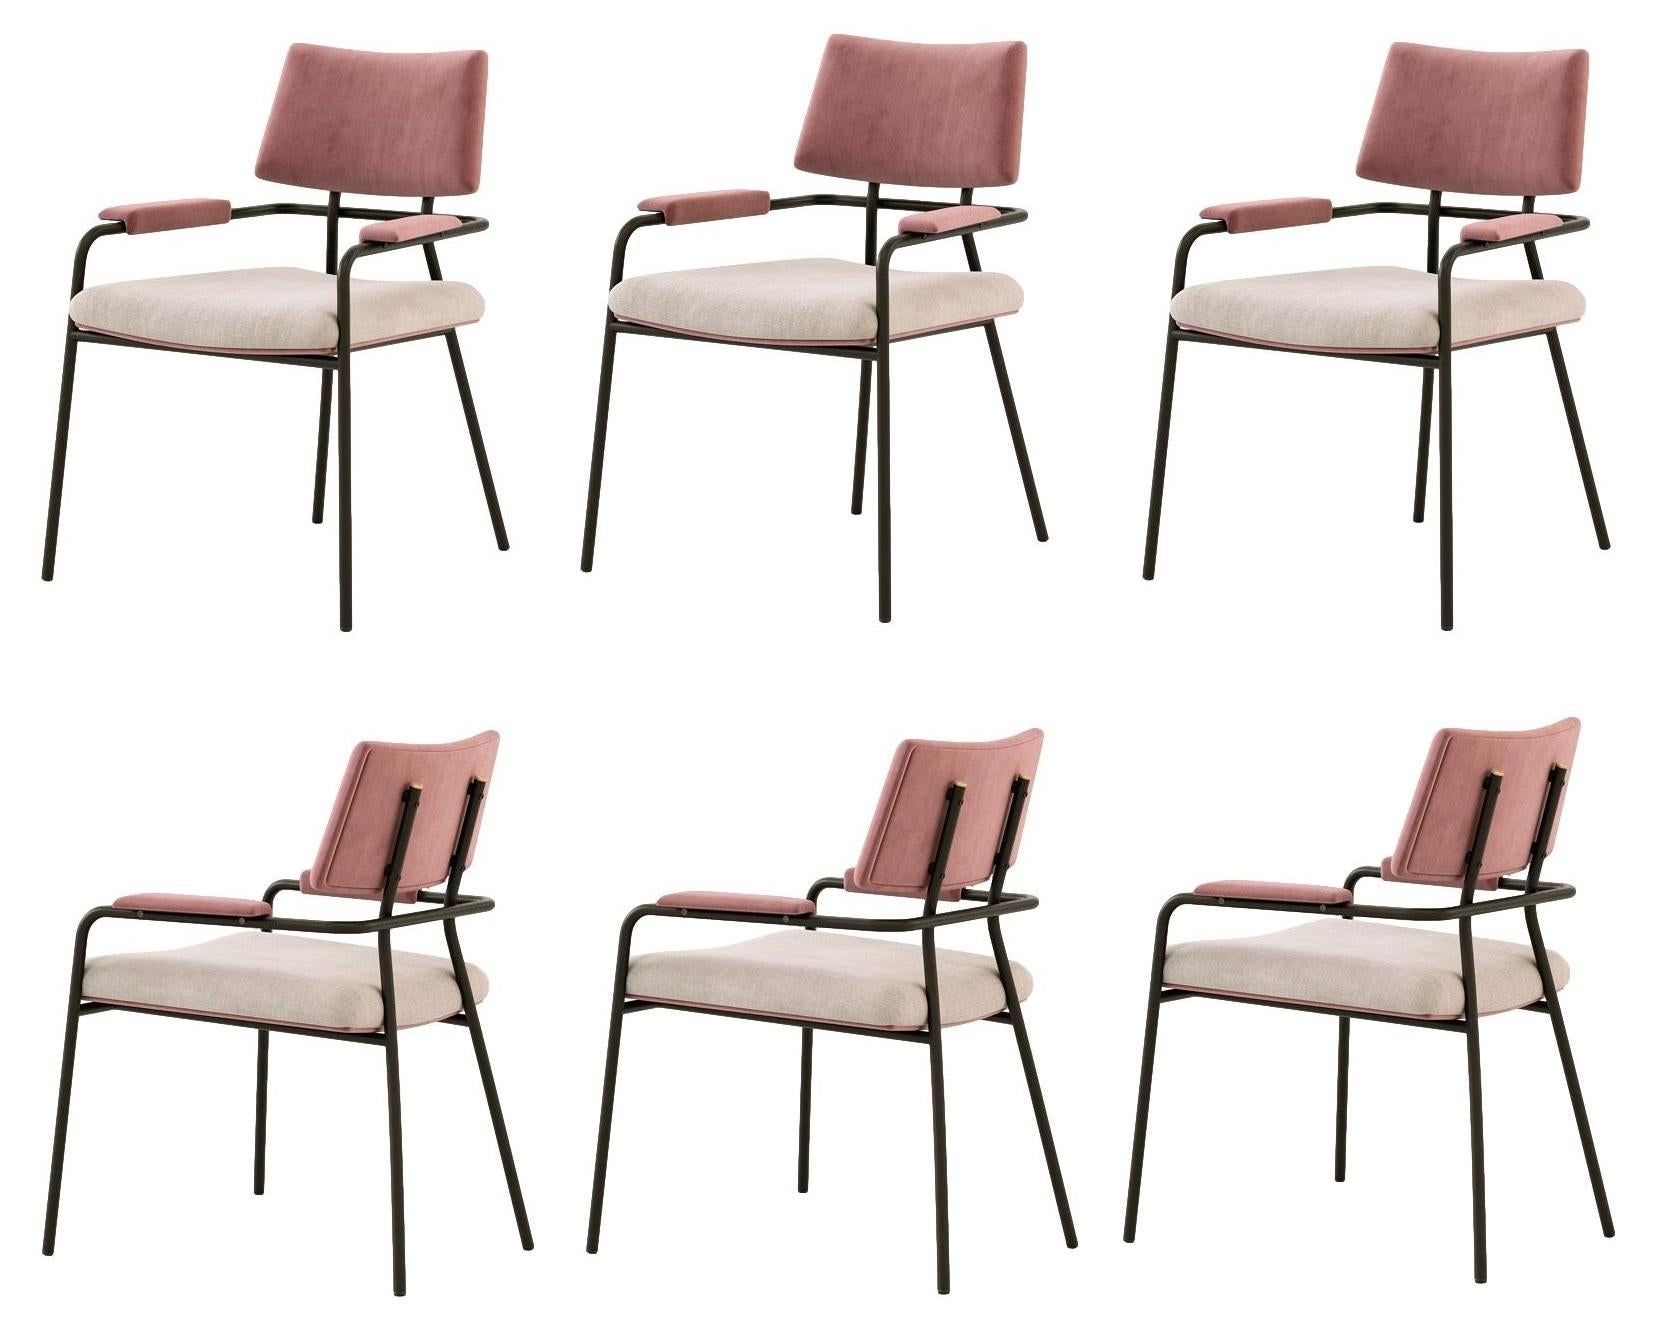 Fully upholstered dining chairs combining different materials and textures.
Measures: L 670 x D 650 x H 910 x SH 480 mm
L 26.78 x D 25.59 x H 35.83 x SH 18.90 in
Fabric structure: Cotton velvet salmon color (back and arms) and beige